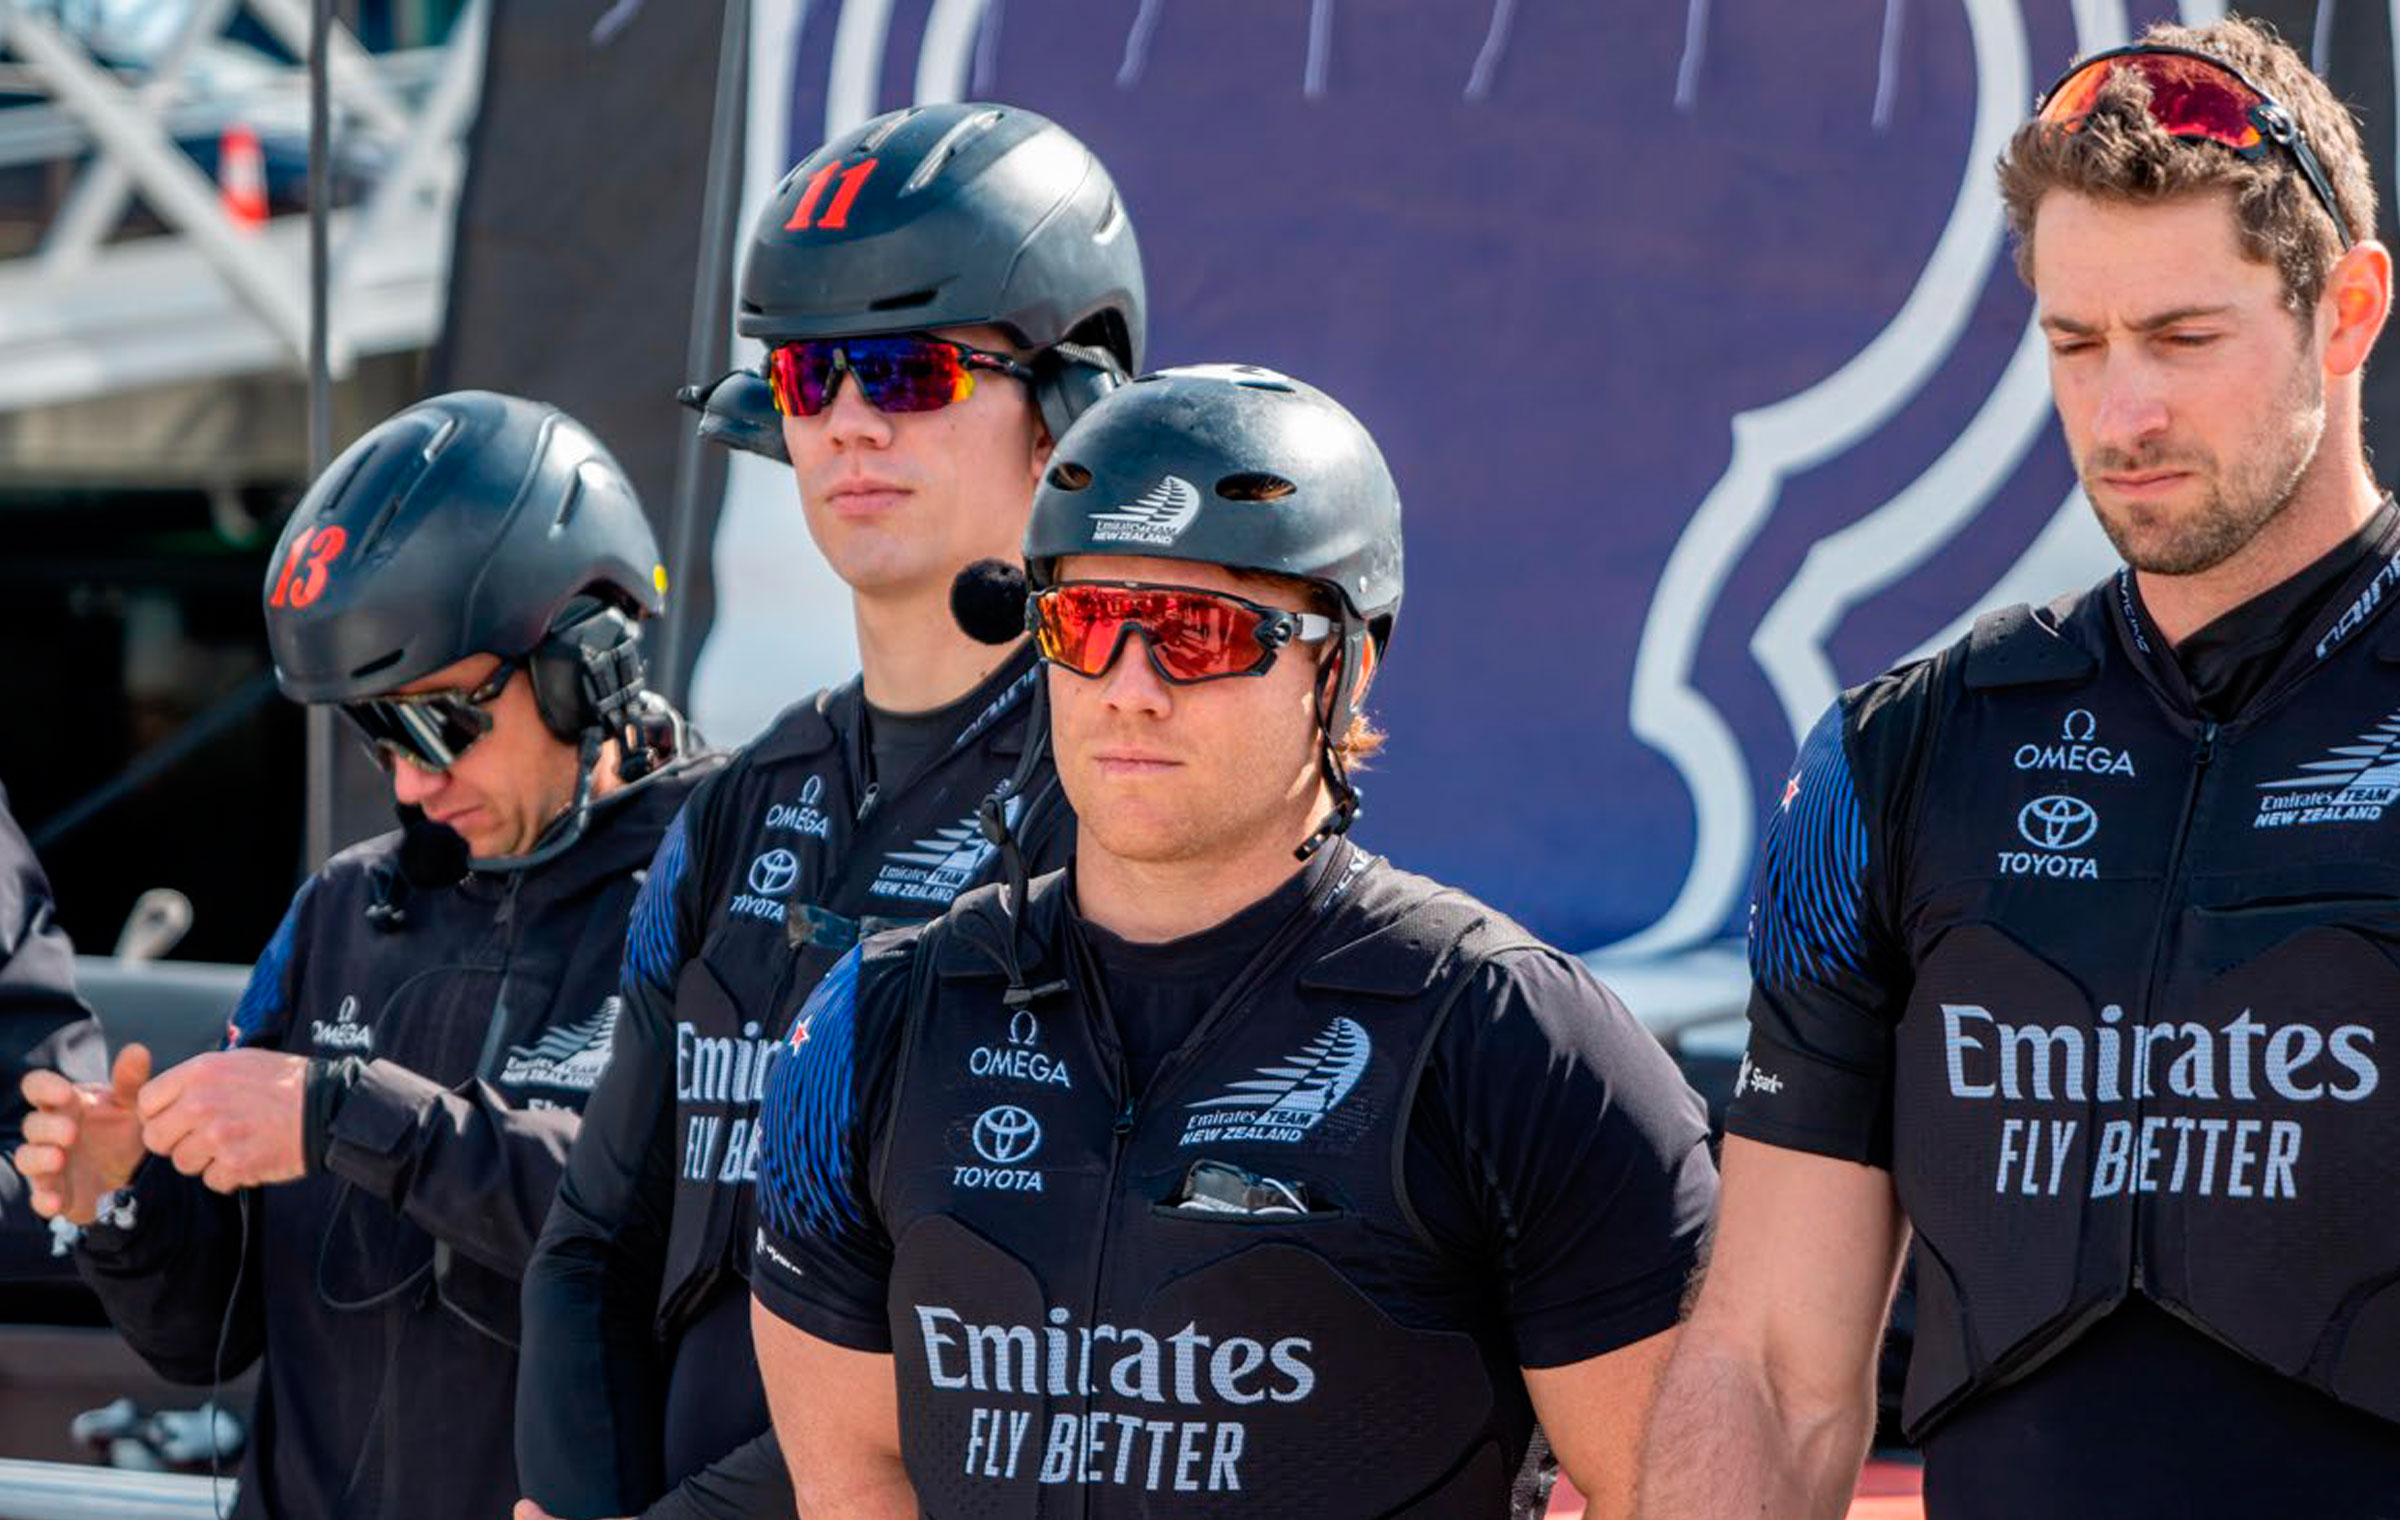 Emirates Team New Zealand  Let's Go Places - Toyota NZ